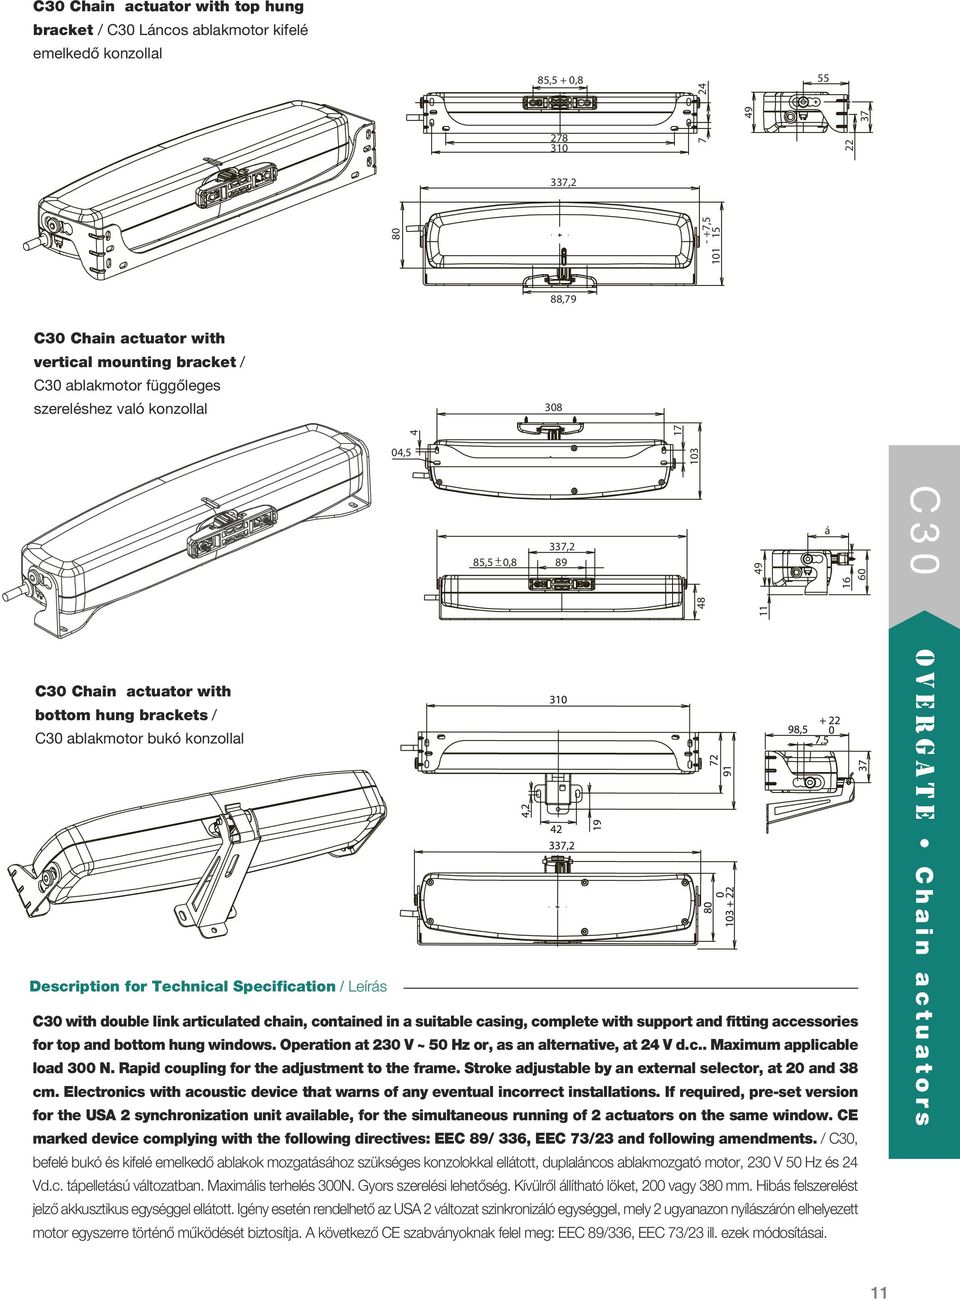 konzollal Description for Technical Specification / Leírás C30 with double link articulated chain, contained in a suitable casing, complete with support and fitting accessories for top and bottom